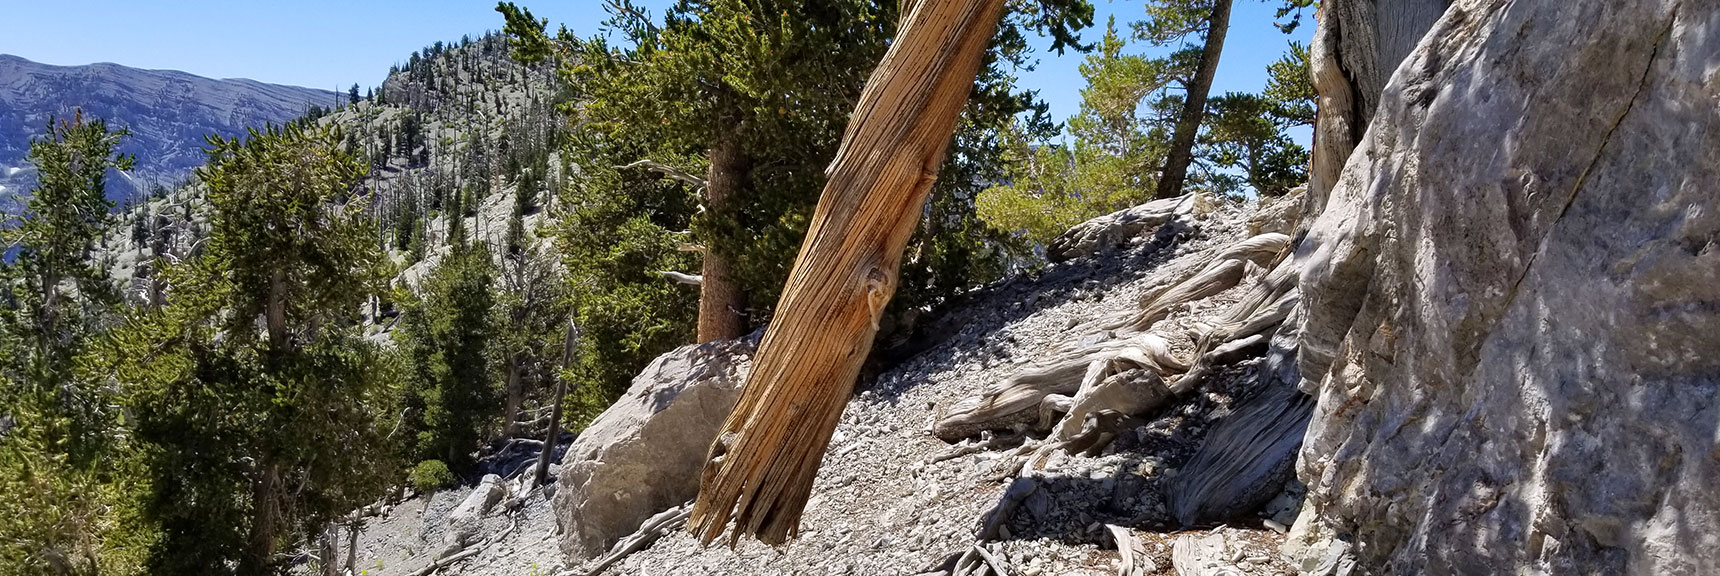 Tree Trunk Suspended in Mid-Air on North Ridge of Kyle Canyon from Mummy Mt. to Lee Peak in Mt Charleston Wilderness, Nevada